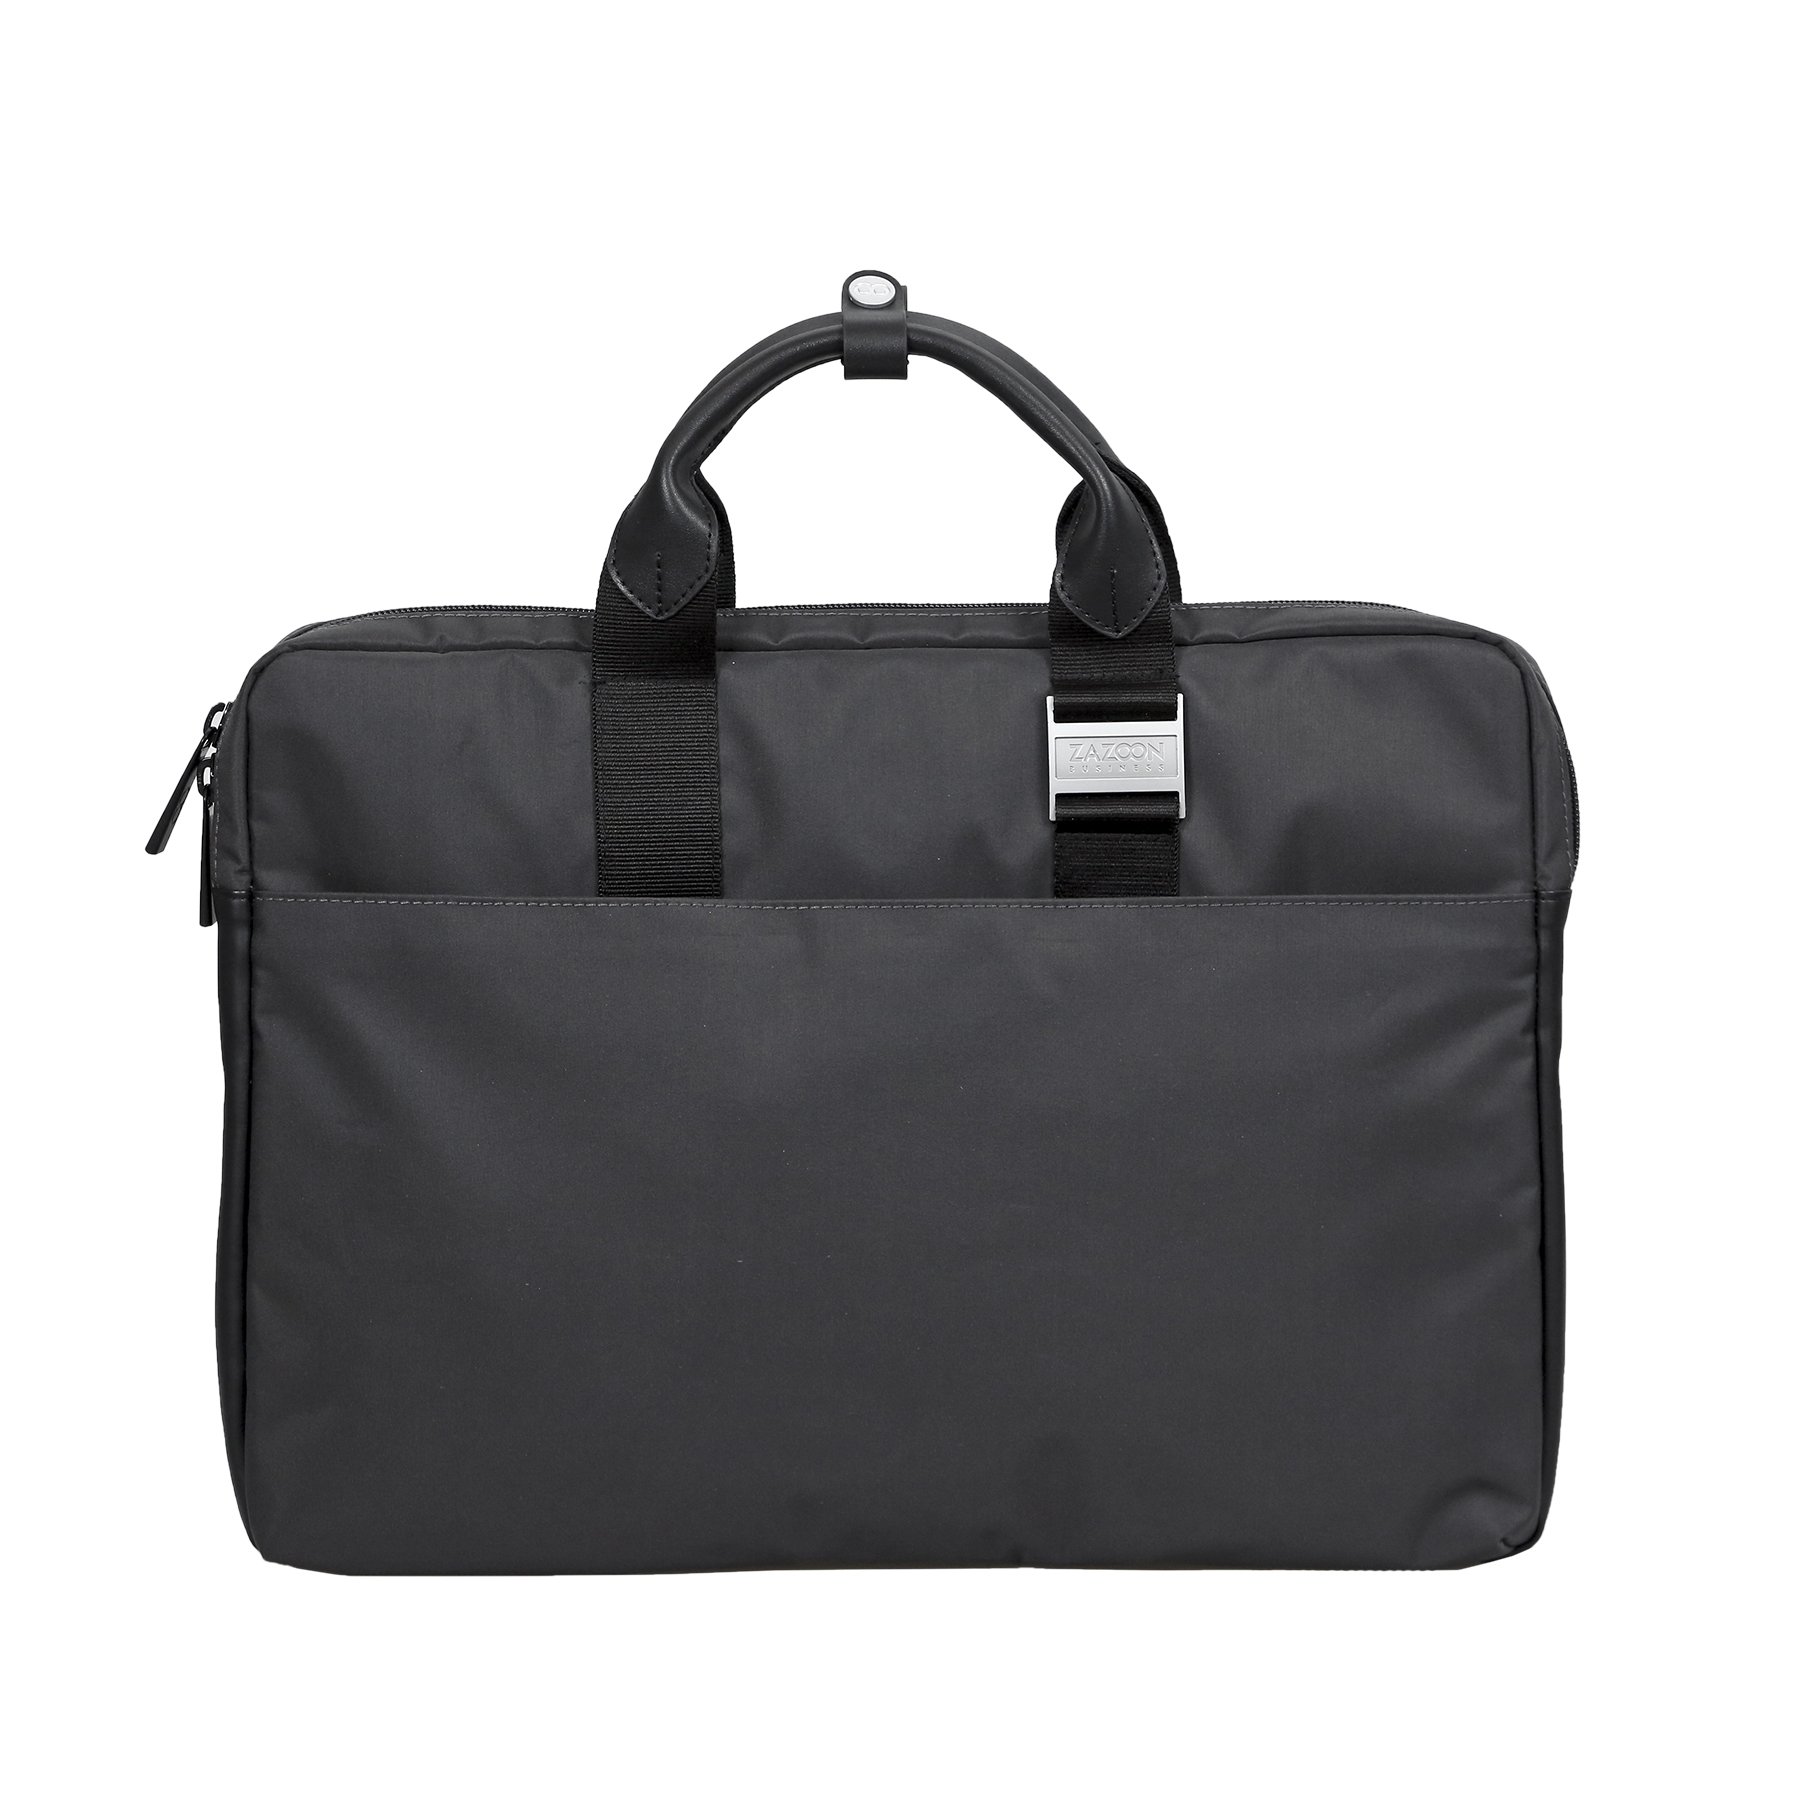 Natico Simple Document Bag, Black, One Size